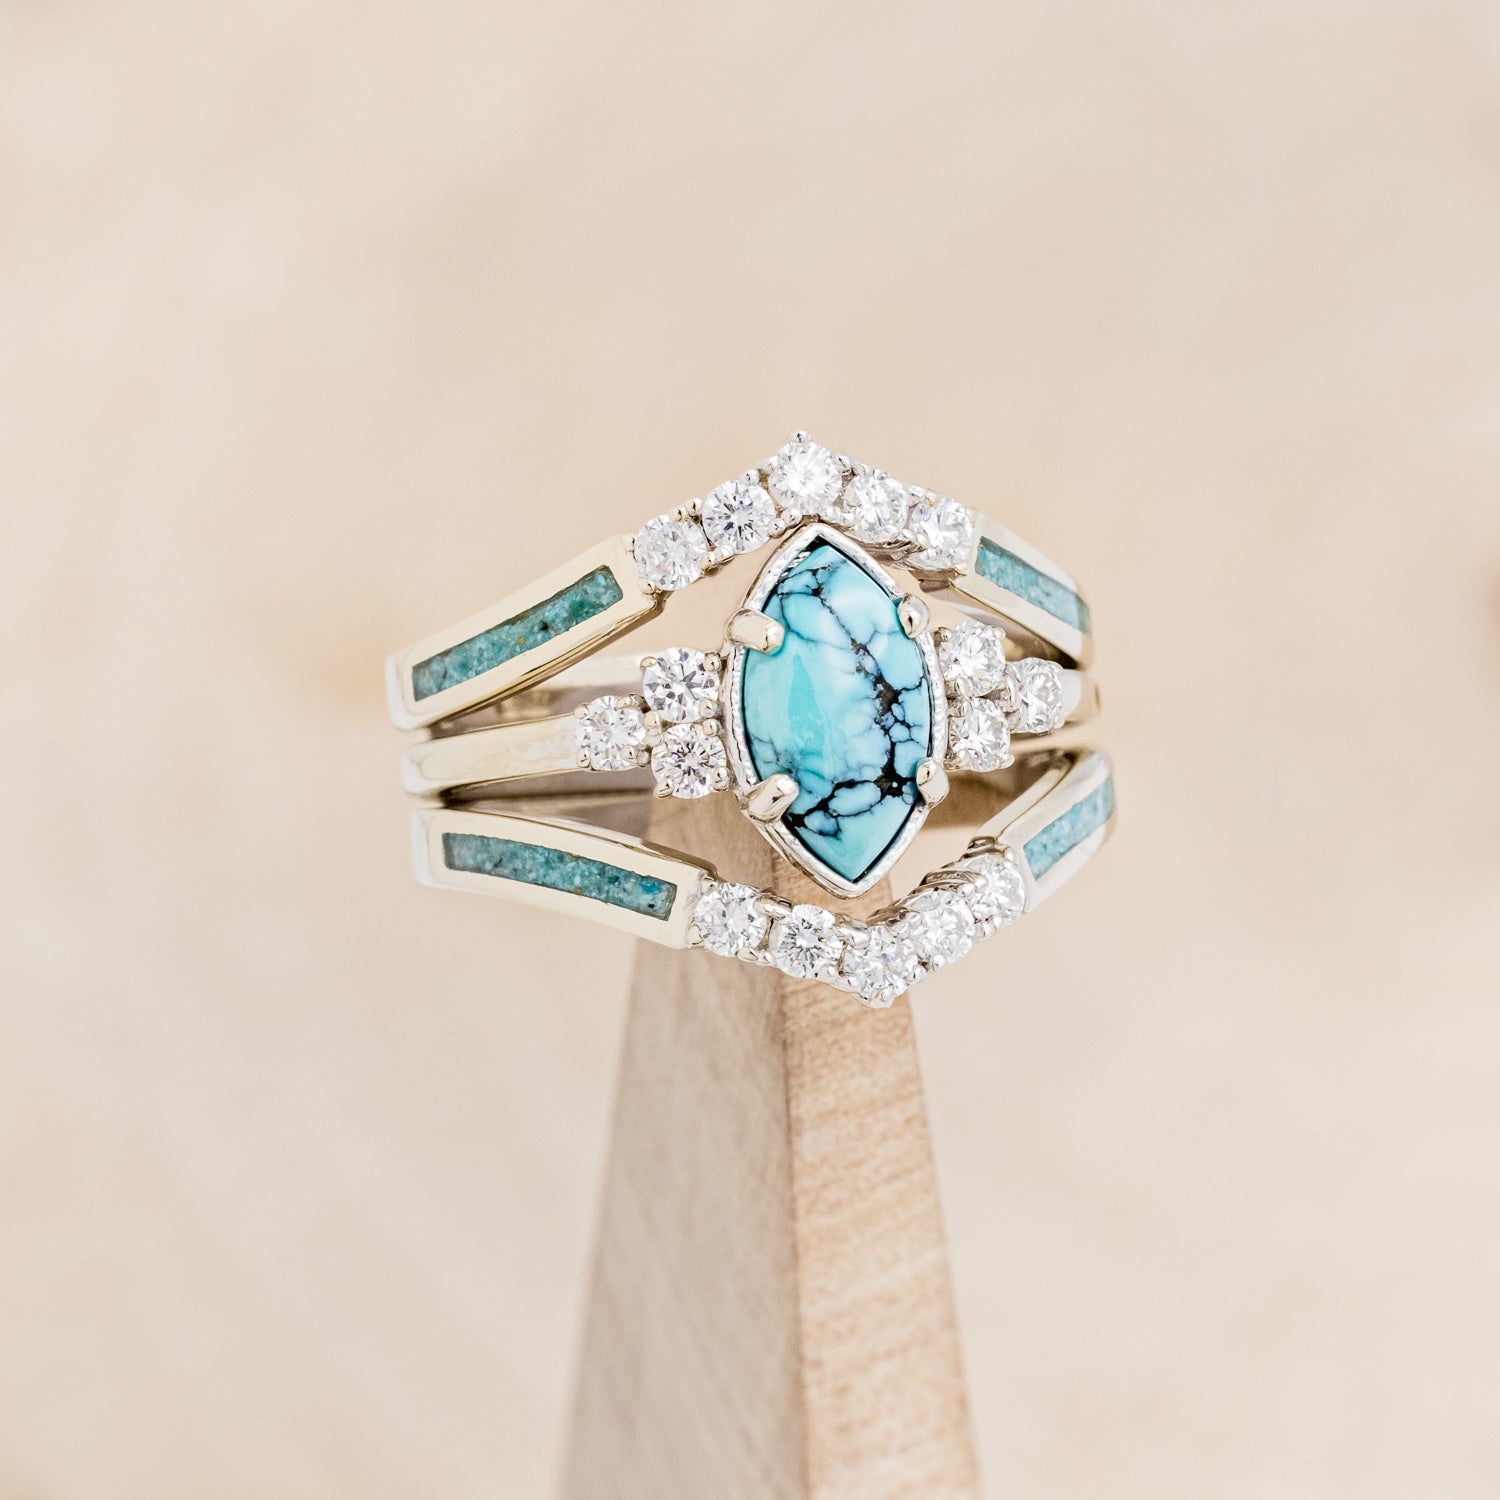 Raya Ring Guard - Turquoise Ring Guard with Diamond Accents 14K White Gold